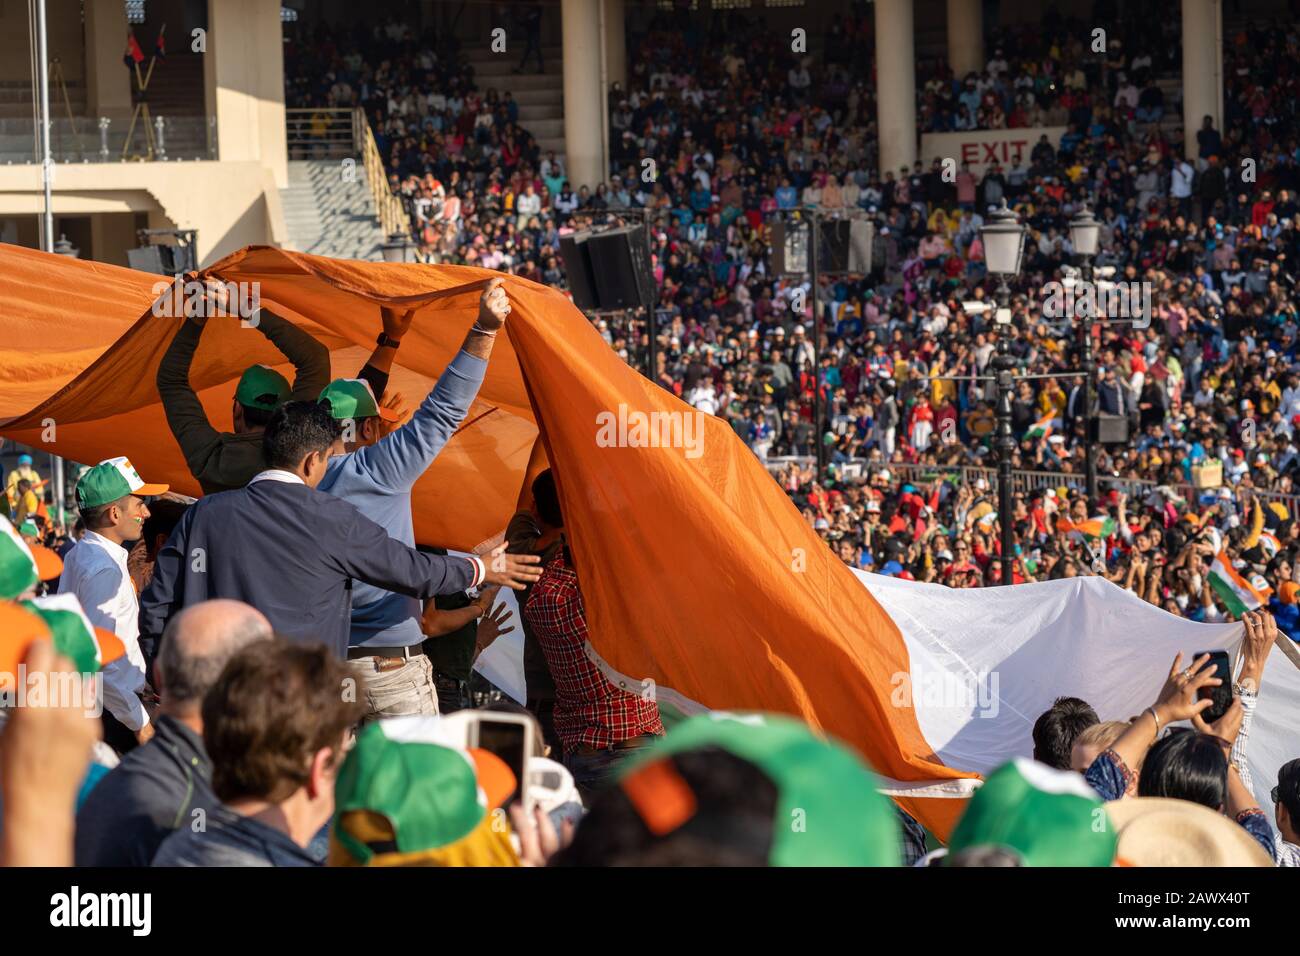 Amritsar, India - Febuary 8, 2020: Crowds in the stadium seating pass up and hold an Indian Flag in preparation of the Wagah Border Closing ceremony w Stock Photo